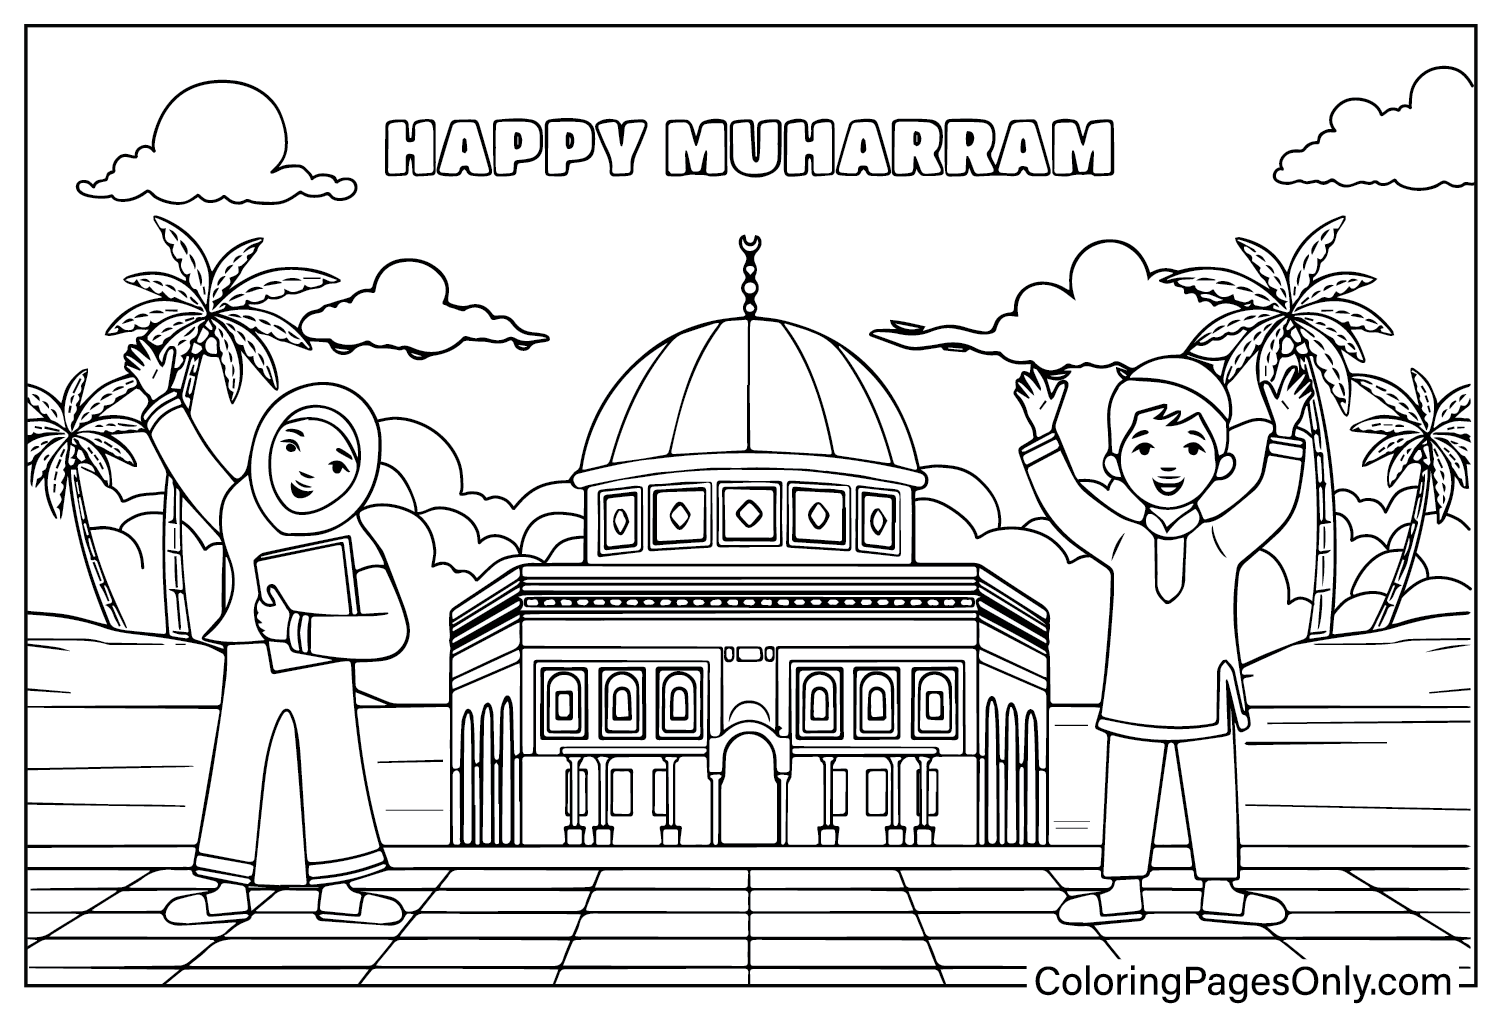 Palestine Happy Muharram Coloring Page from Palestine